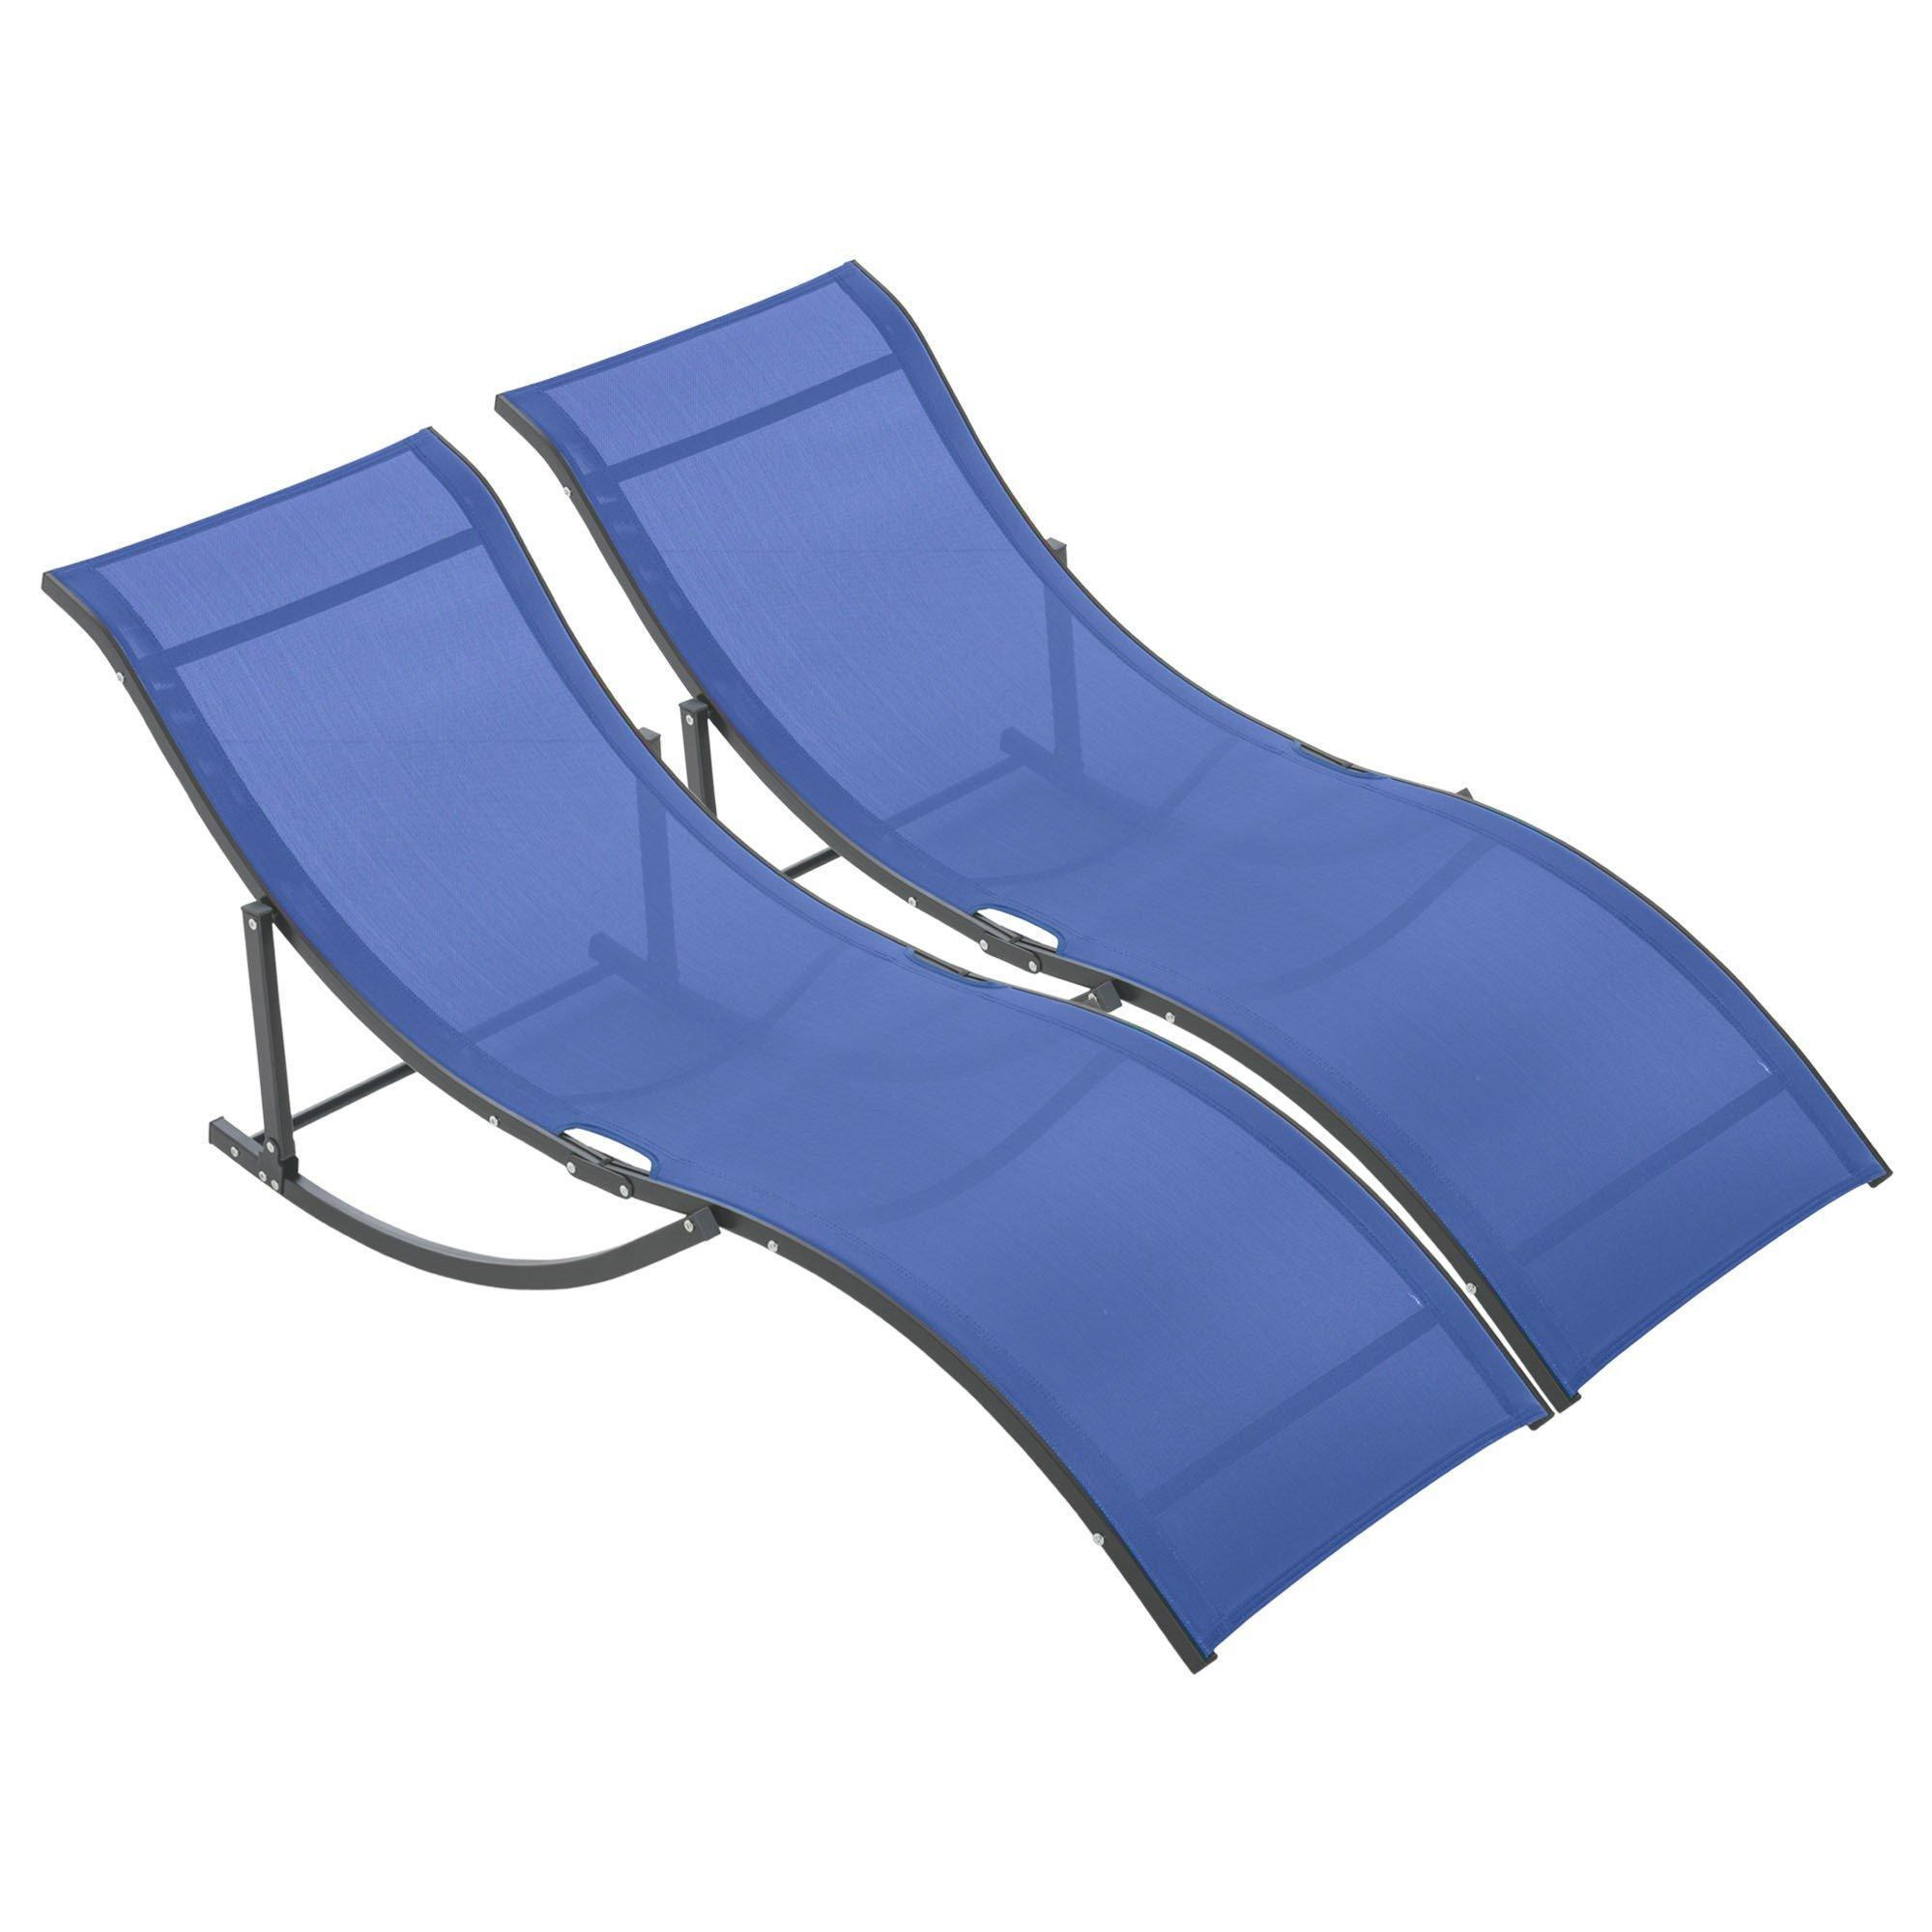 2pcs S-shaped Lounge Chair Sun Lounger Foldable Reclining Sleeping Bed - image 1